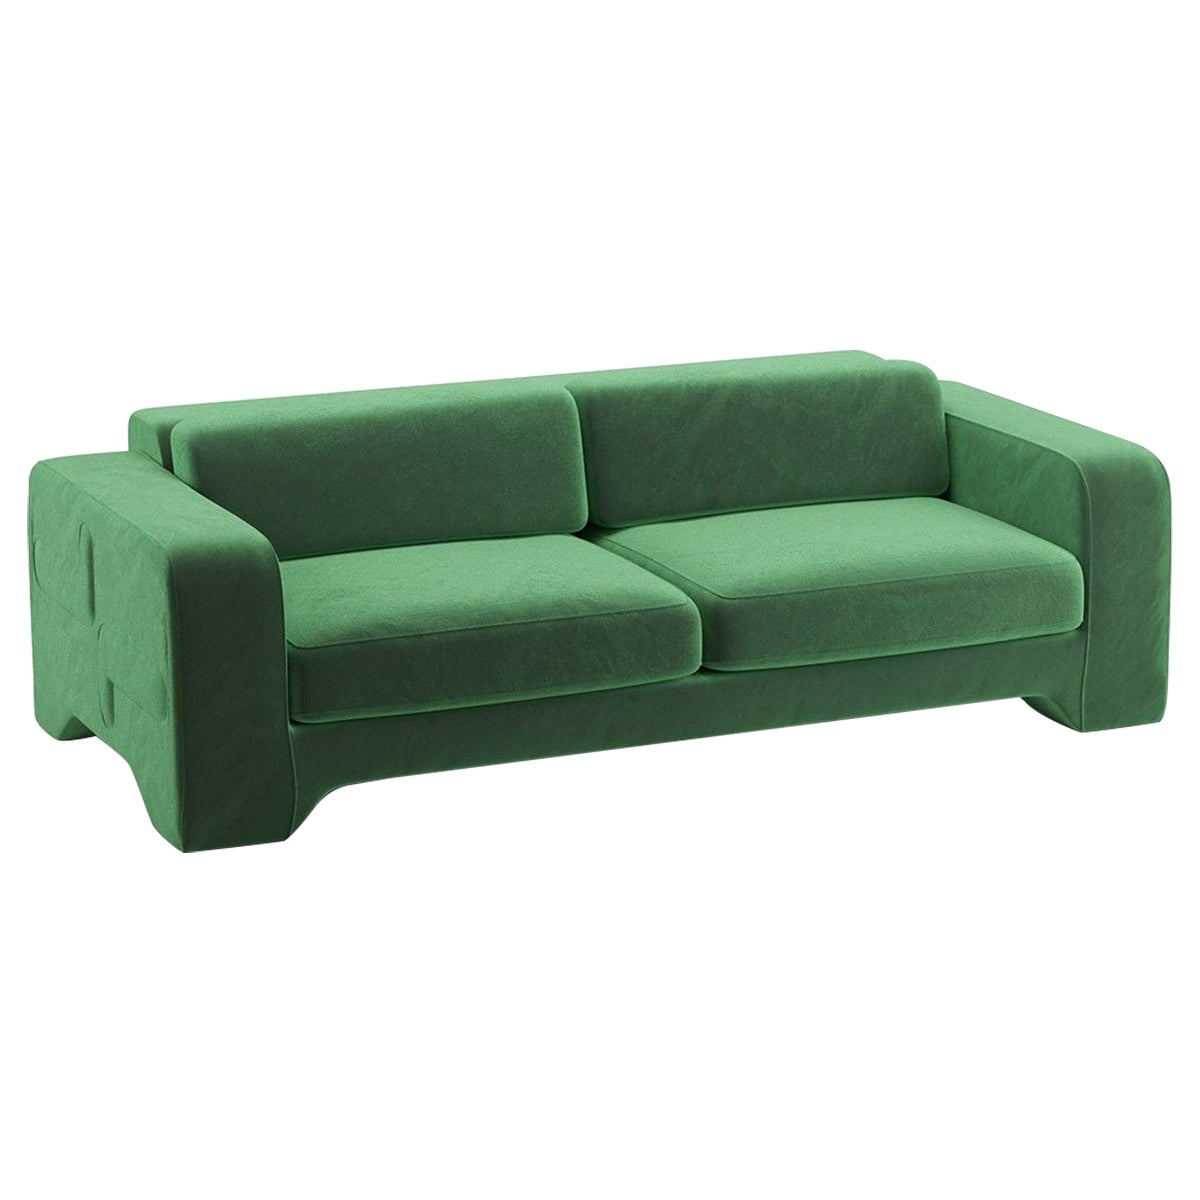 Popus Editions Giovanna 3 Seater Sofa in Green '771727'Como Velvet Upholstery For Sale